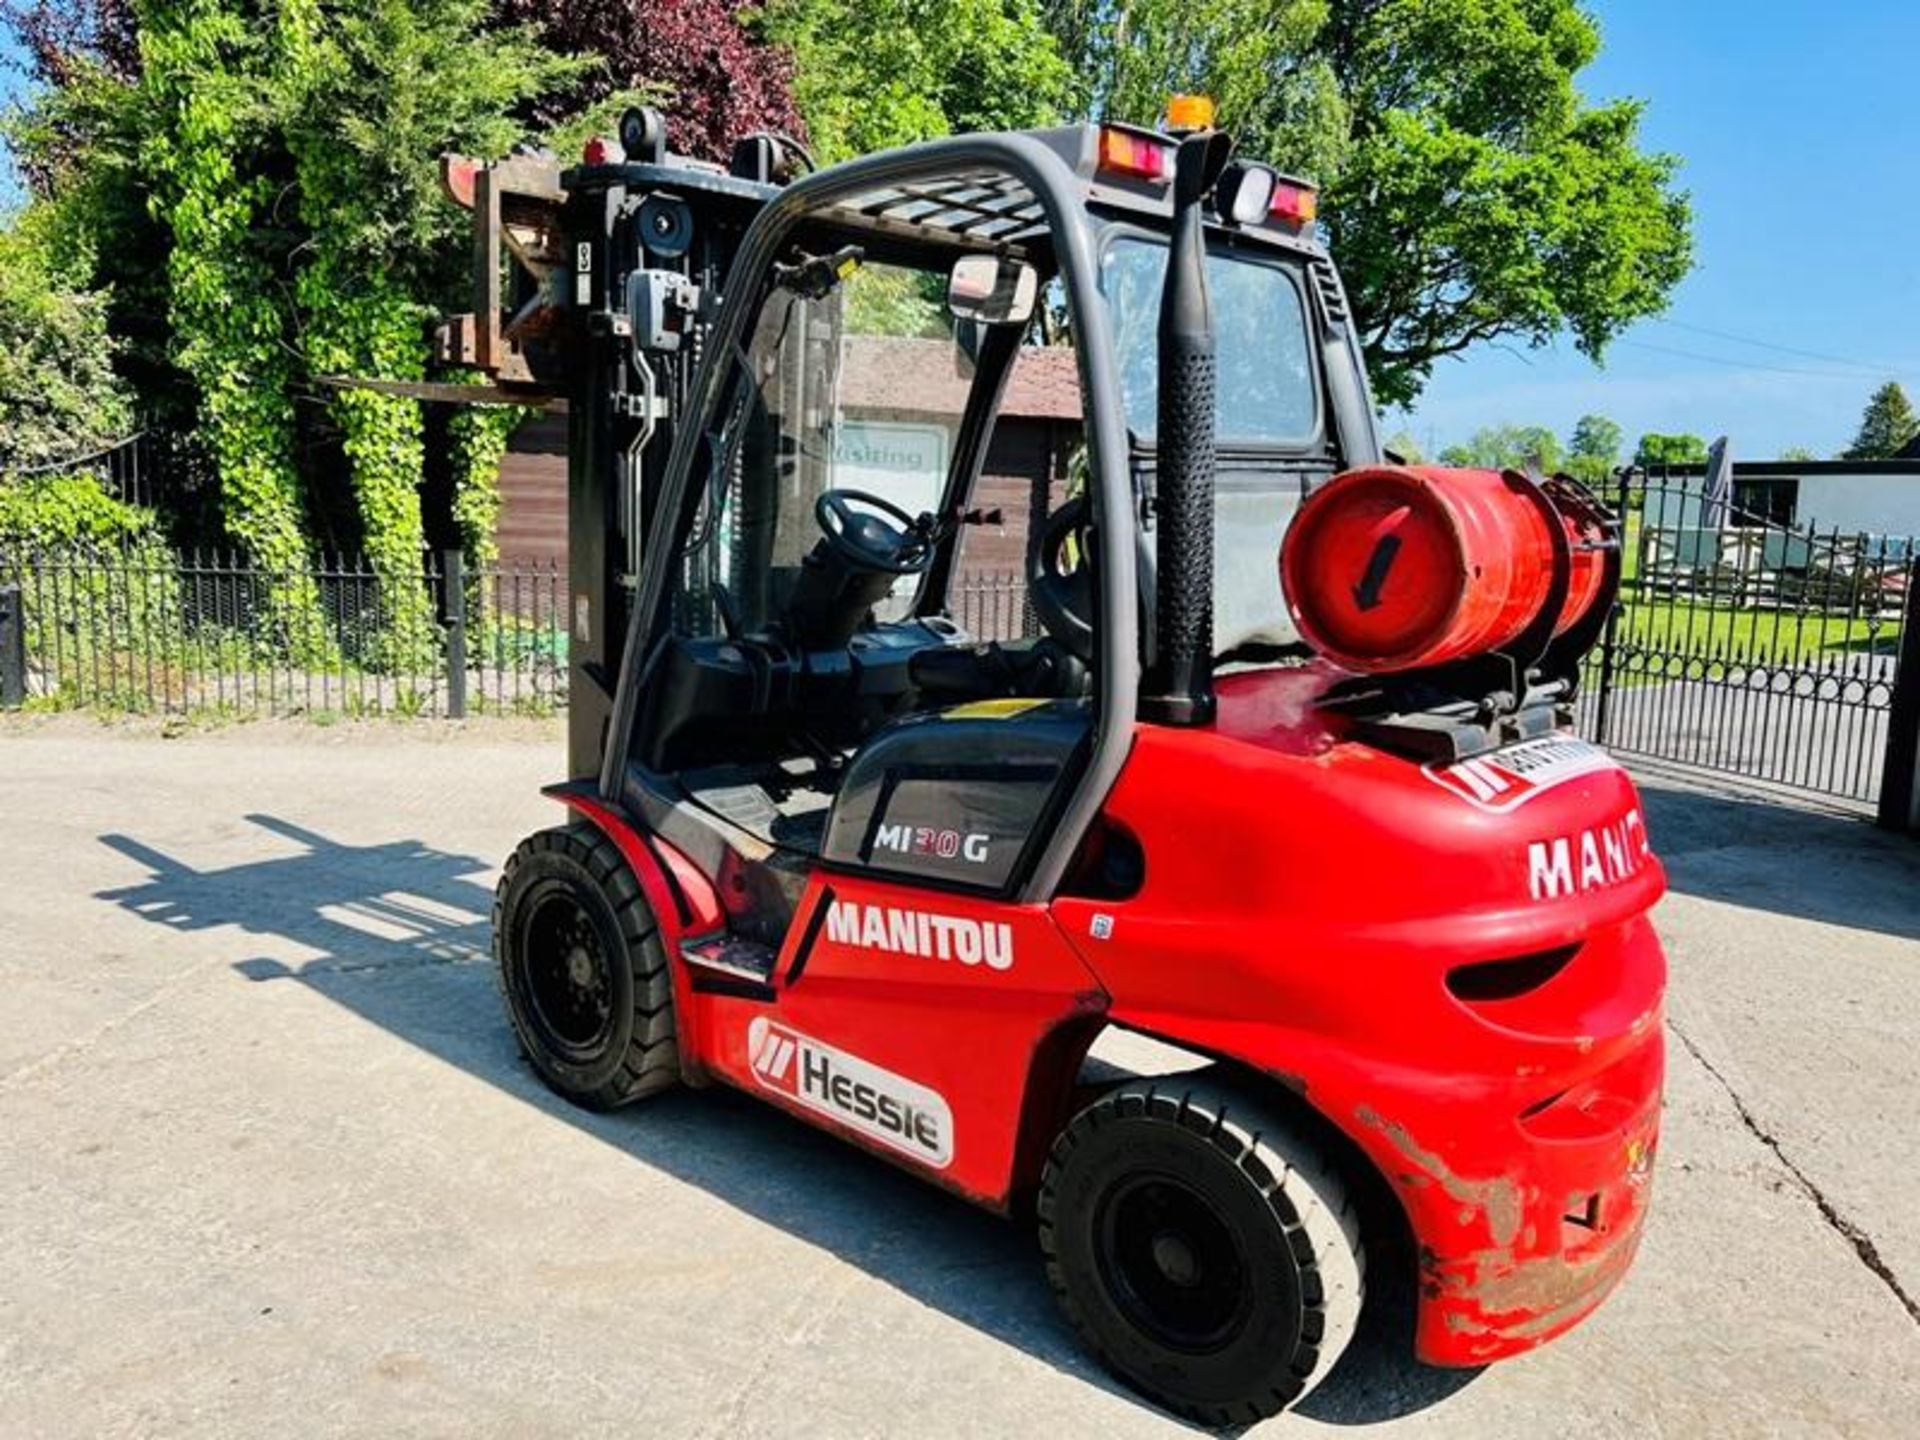 MANITOU MI30G FORKLIFT *YEAR 2013, CONTAINER SPEC, 1572 HOURS* C/W TURN TABLE